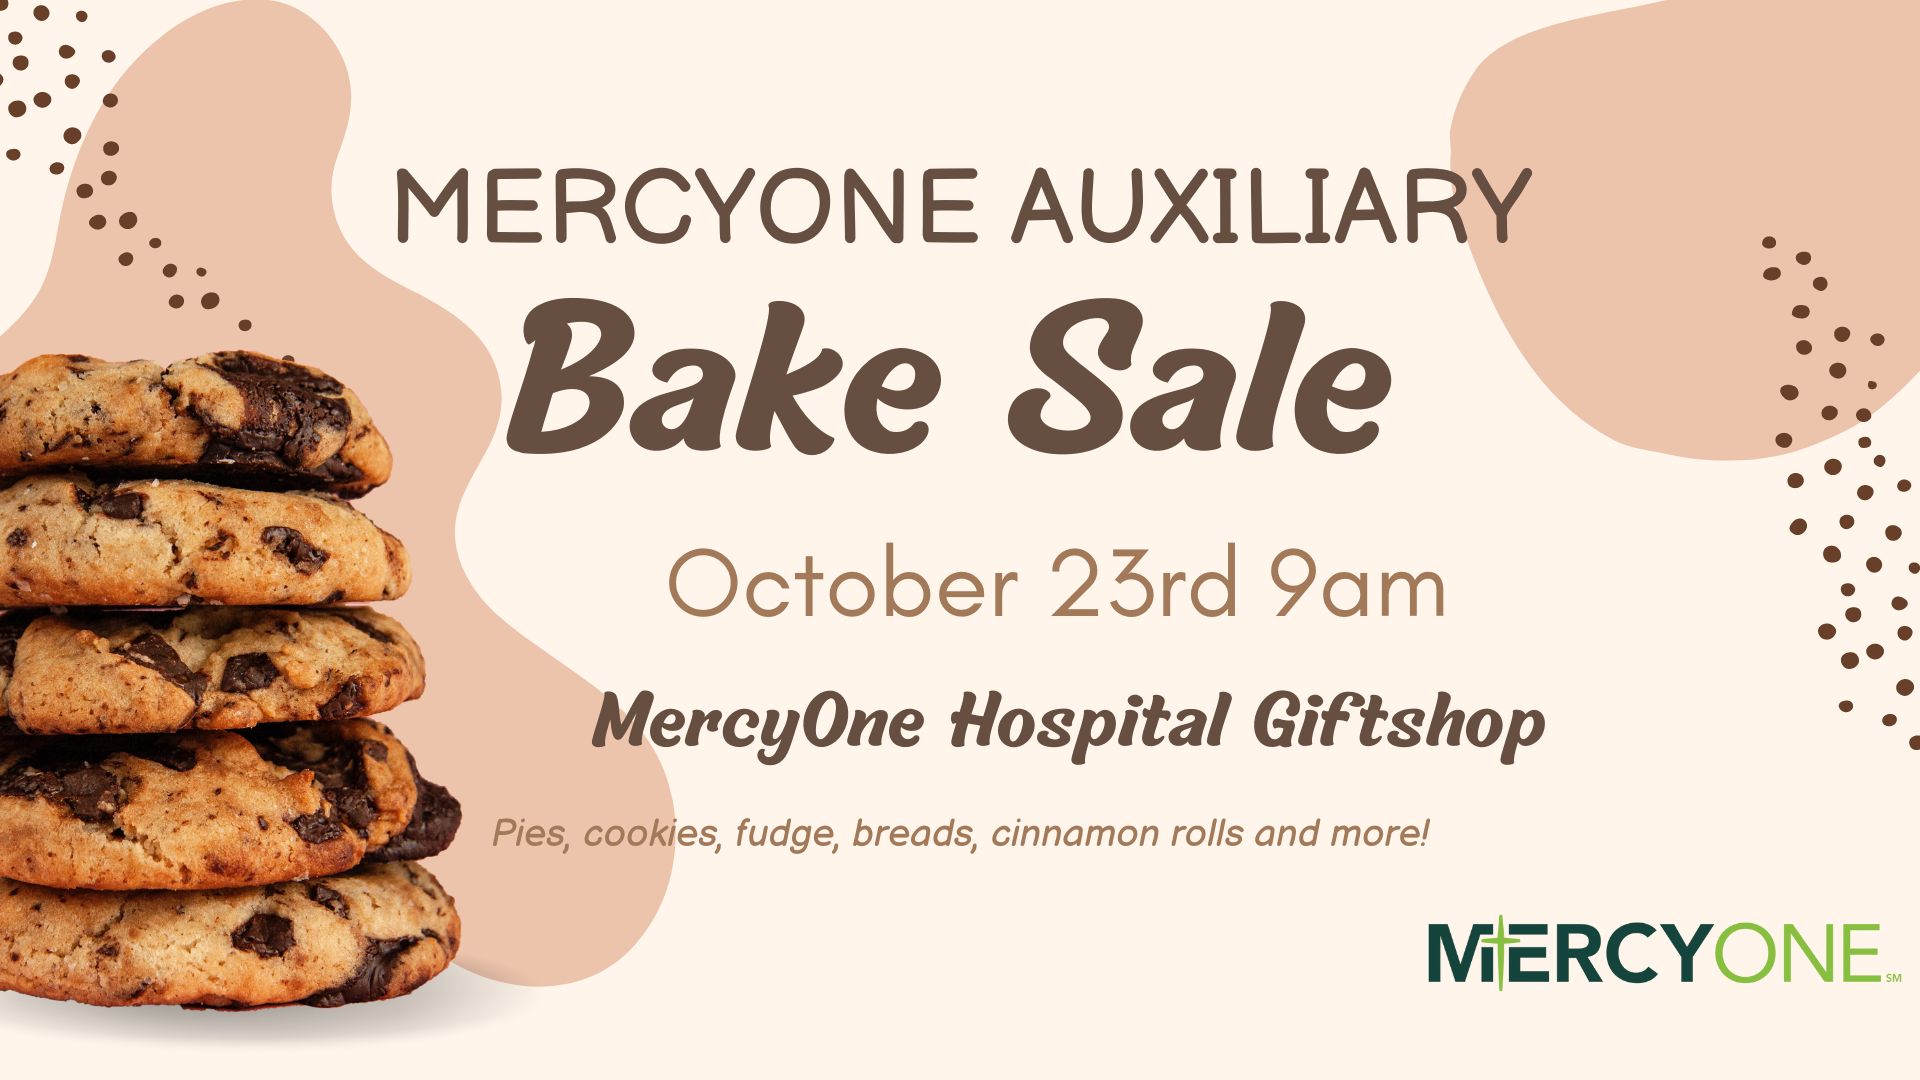 MercyOne Auxiliary Bake Sale October 23rd